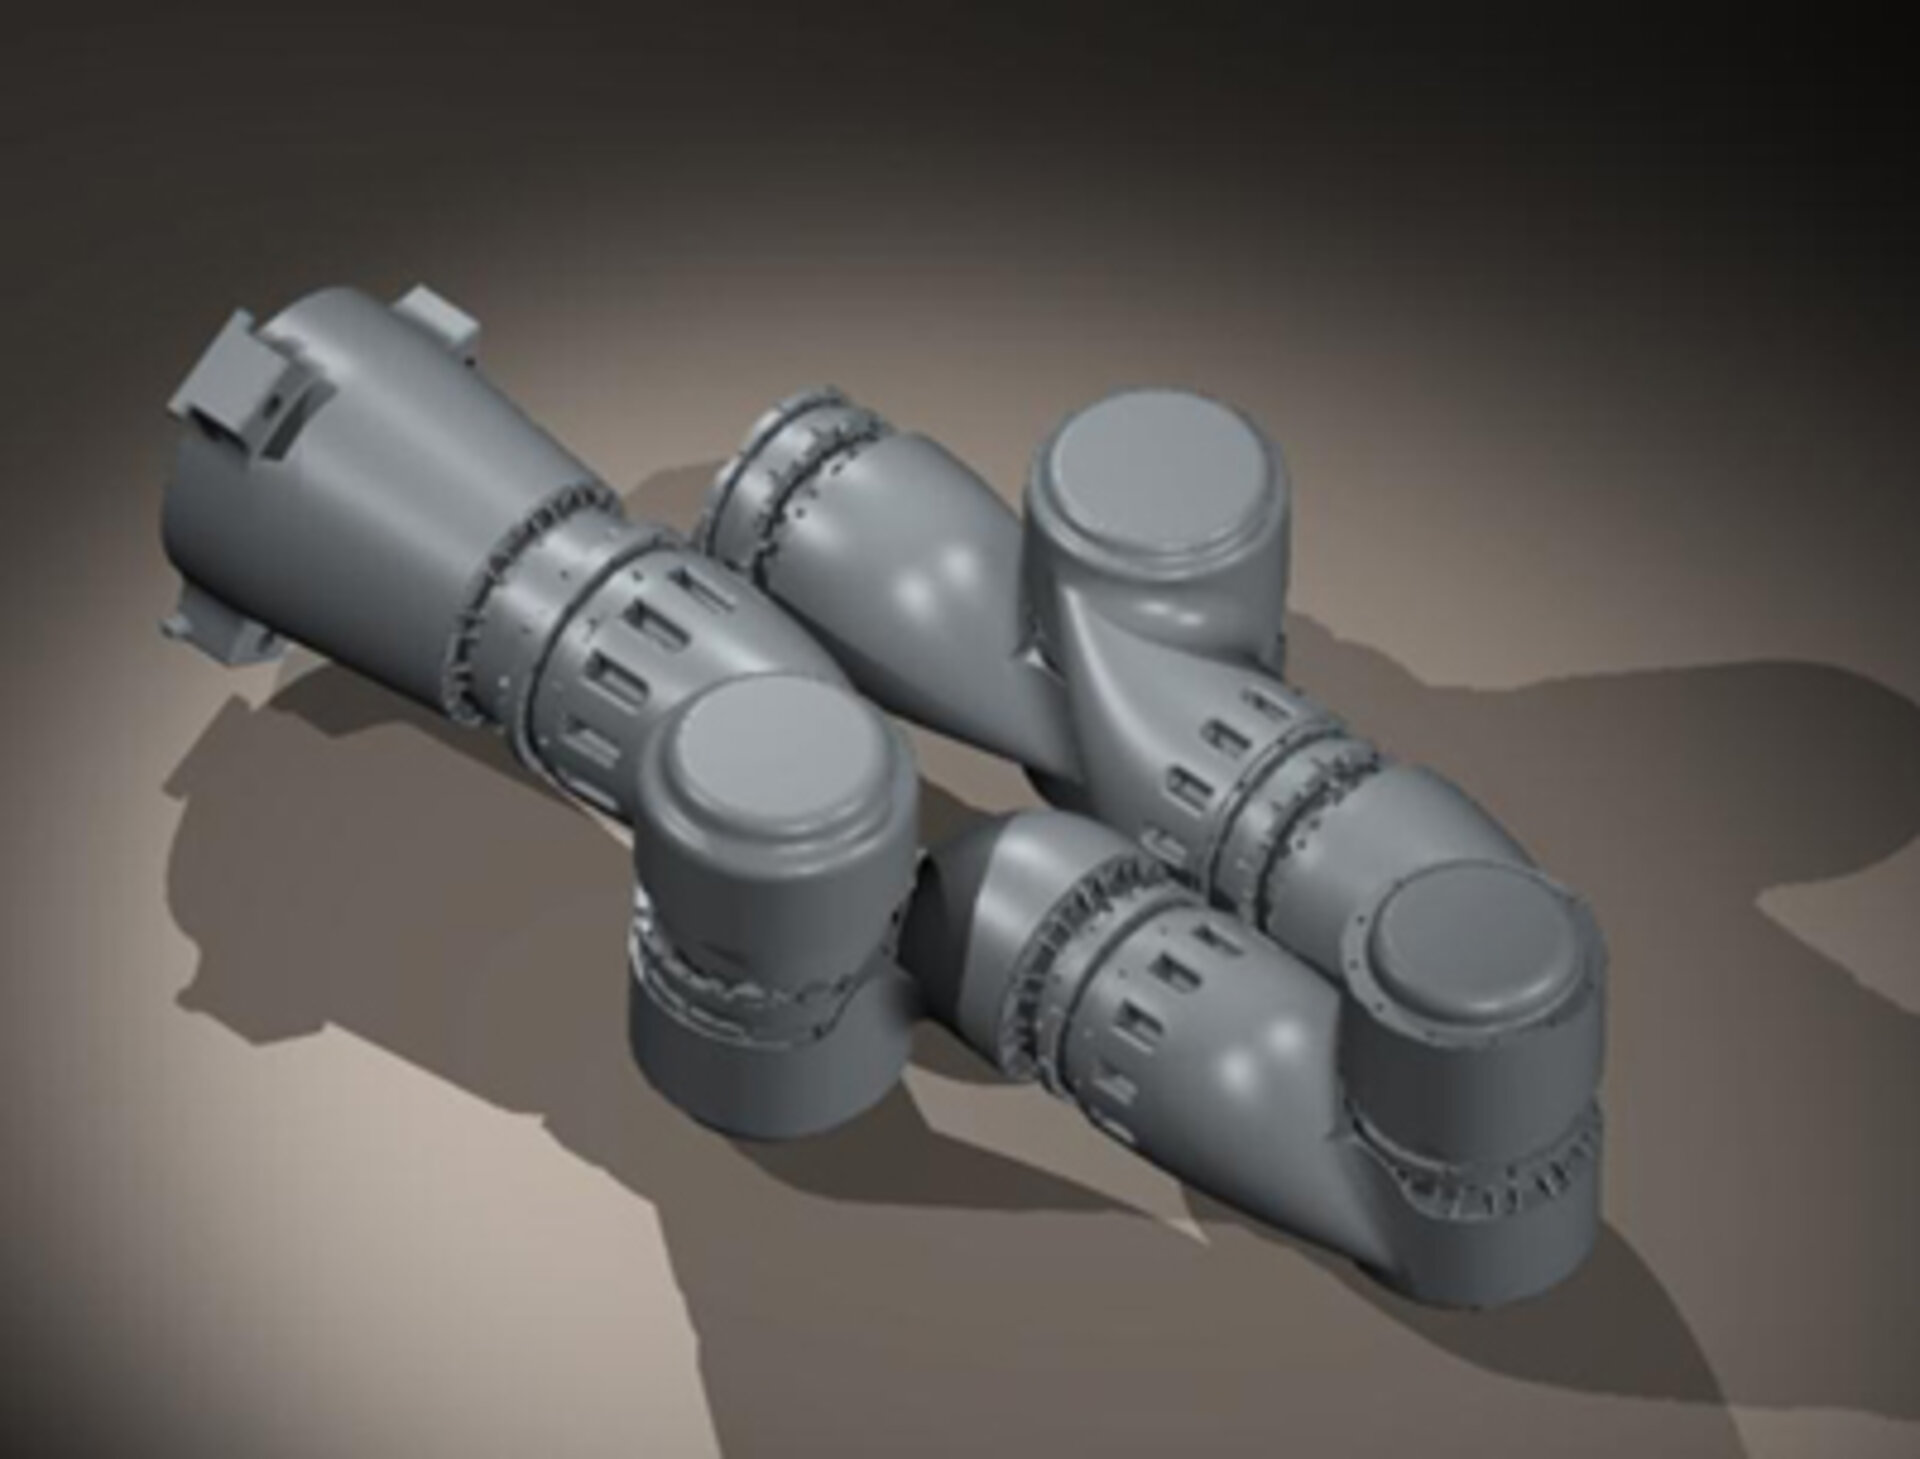 3D rendering showing DexArm in its stowed configuration